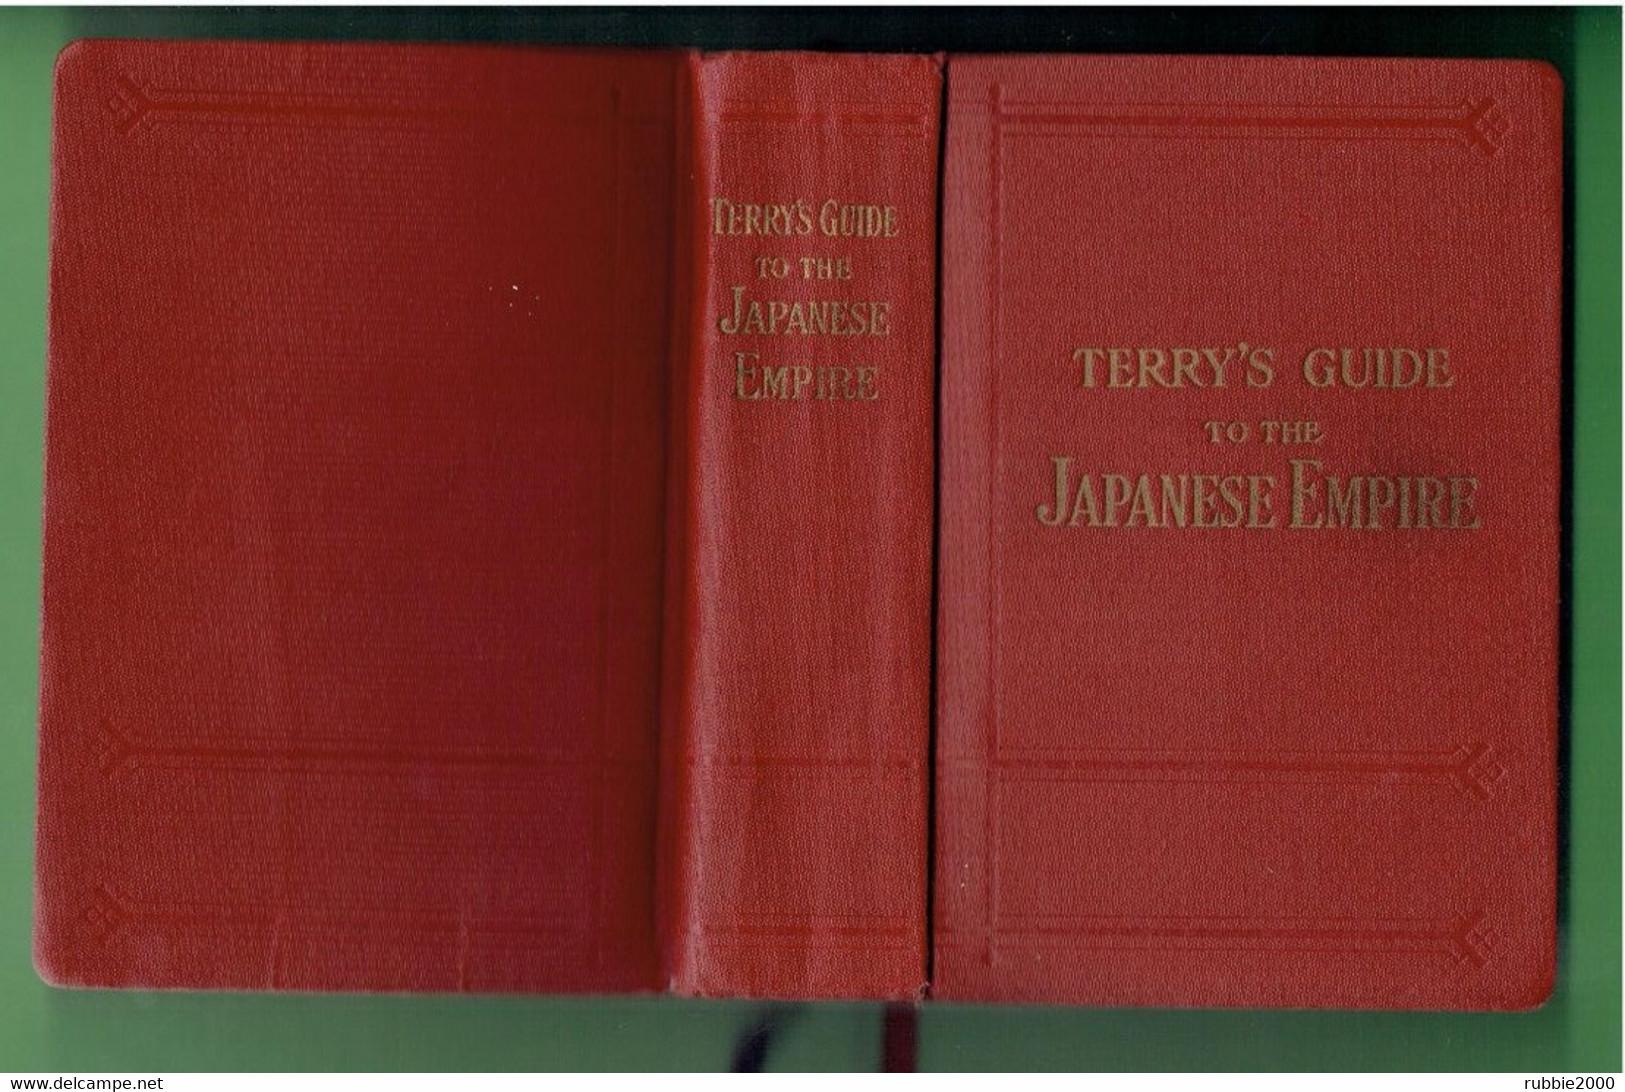 TERRY S GUIDE TO THE JAPANESE EMPIRE 1930 INCLUDING KOREA AND FORMOSA MANCHURIA THE TRANS SIBERIAN RAILWAY - Asiatica